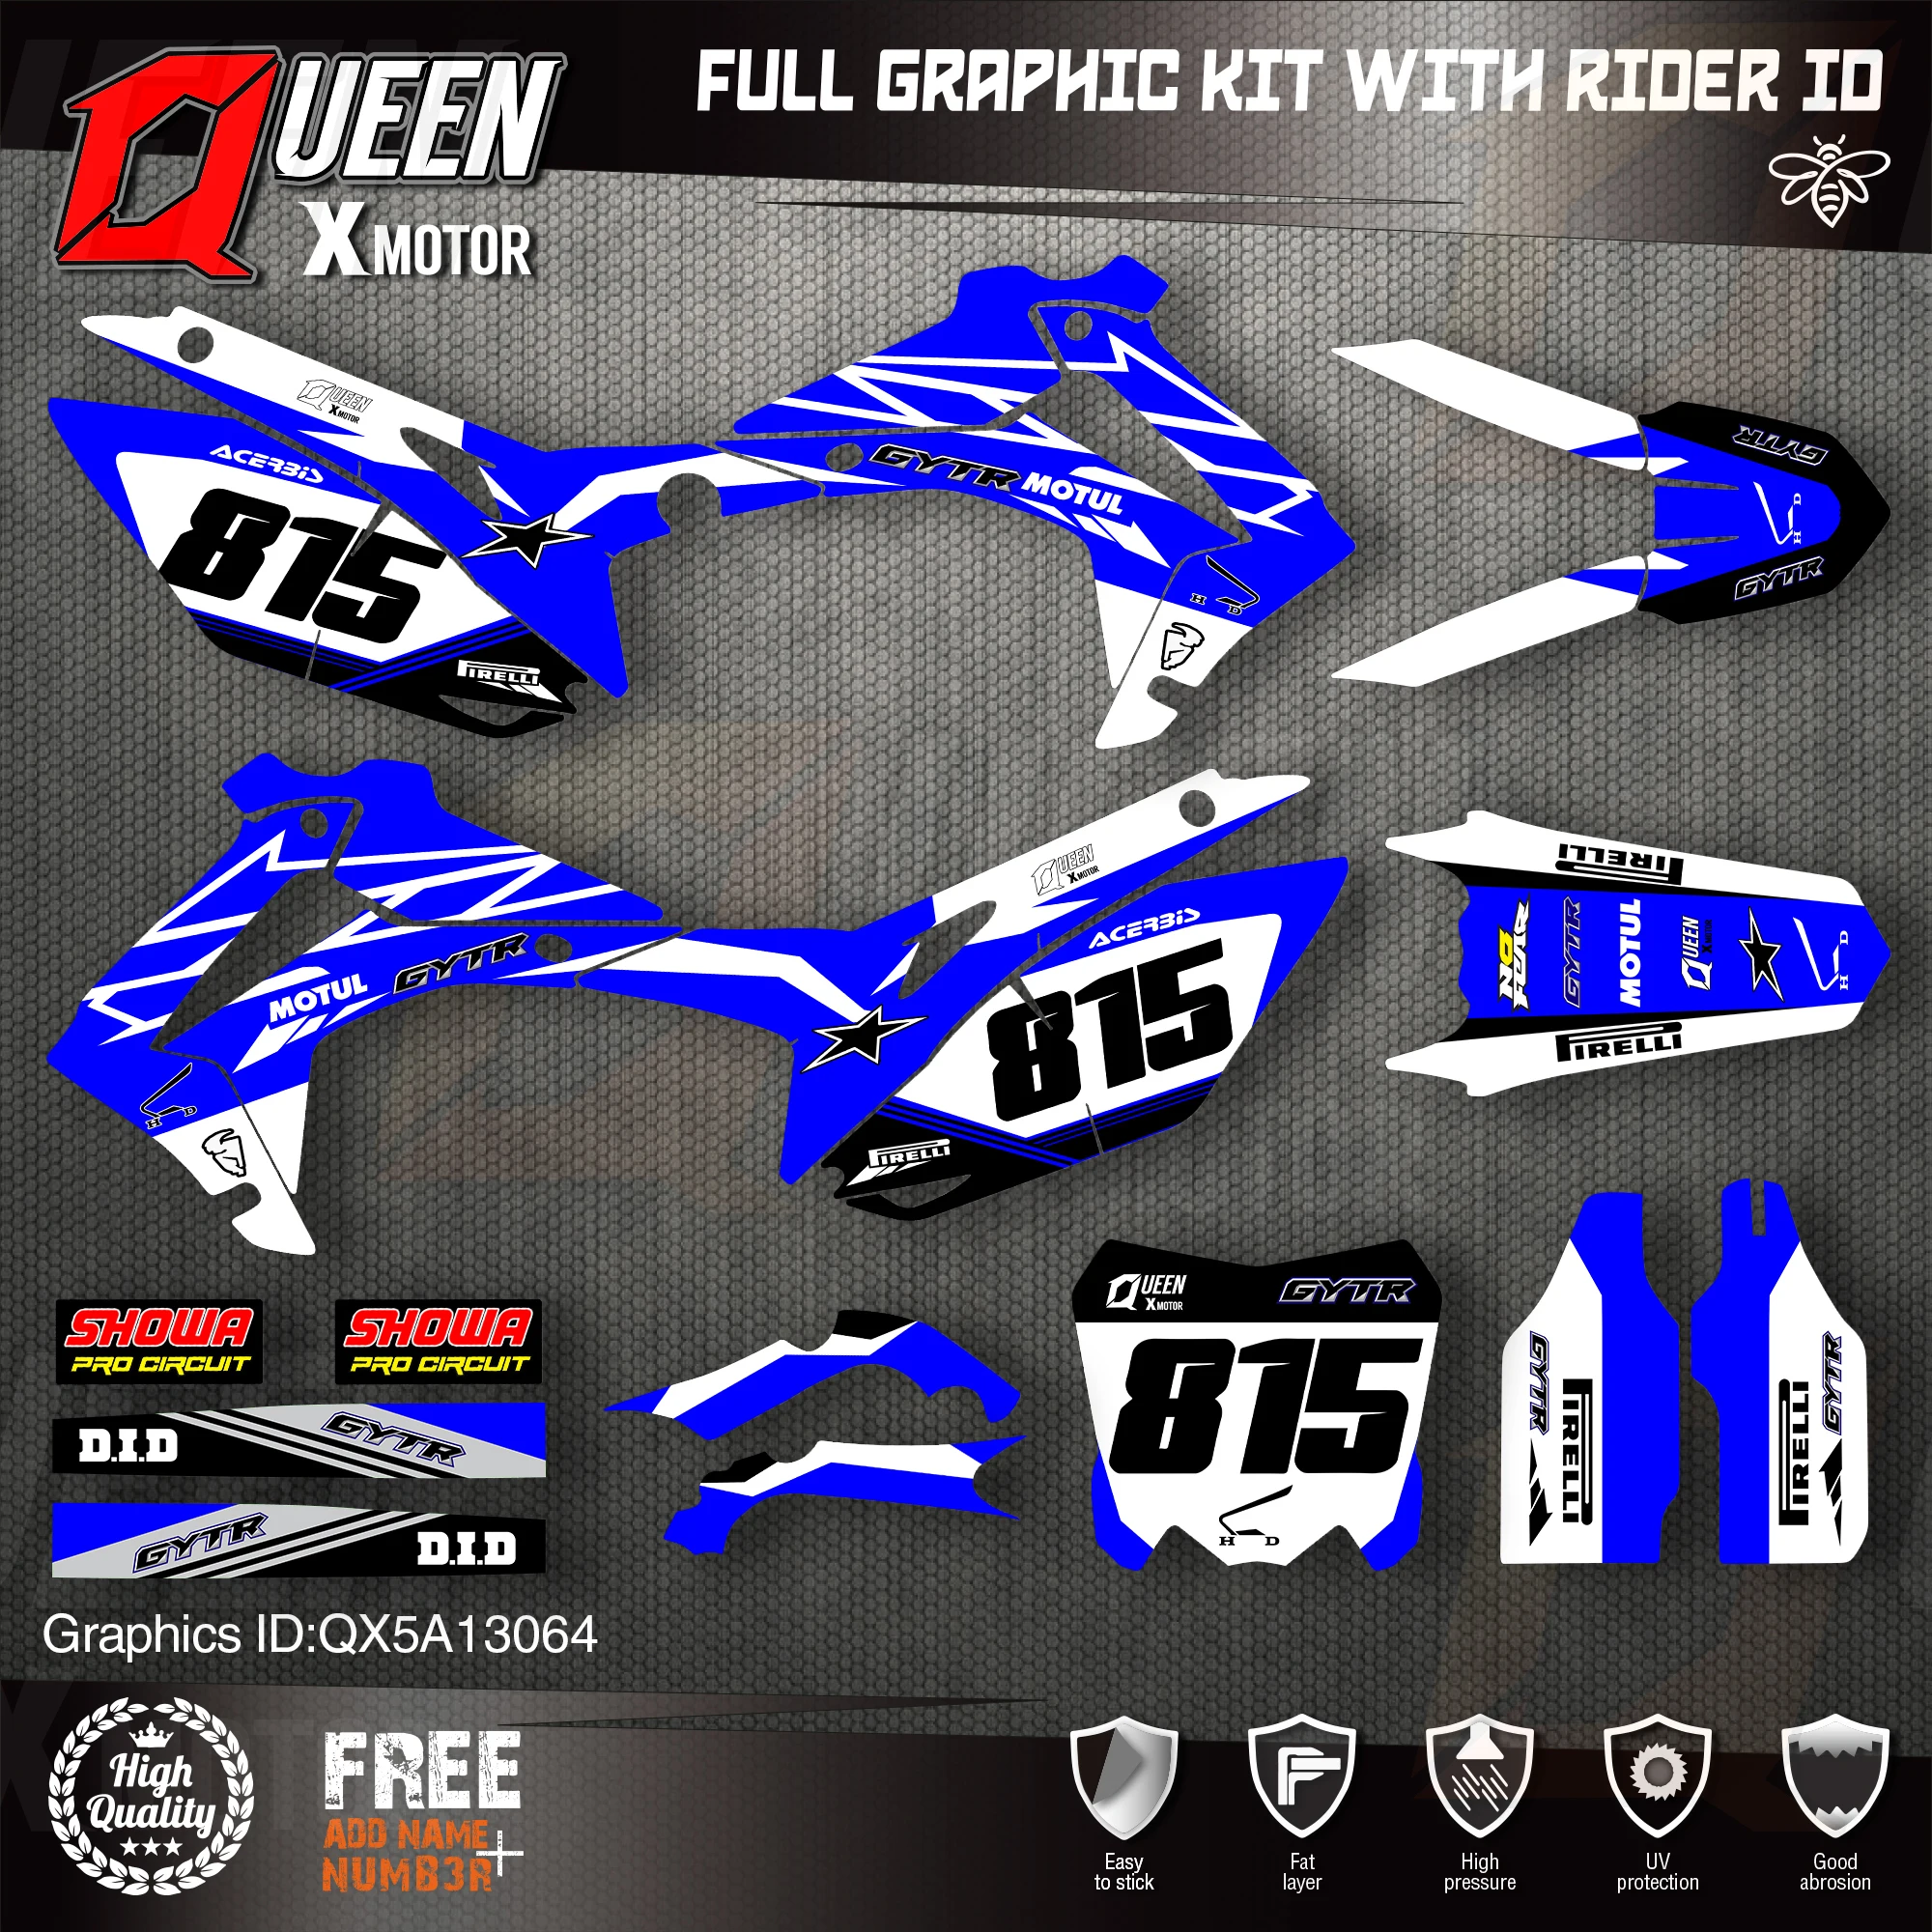 

QUEEN X MOTOR Custom Team Graphics Backgrounds Decals Stickers Kit For HONDA 2014-2017 CRF250R 2013-2016 CRF450R 064